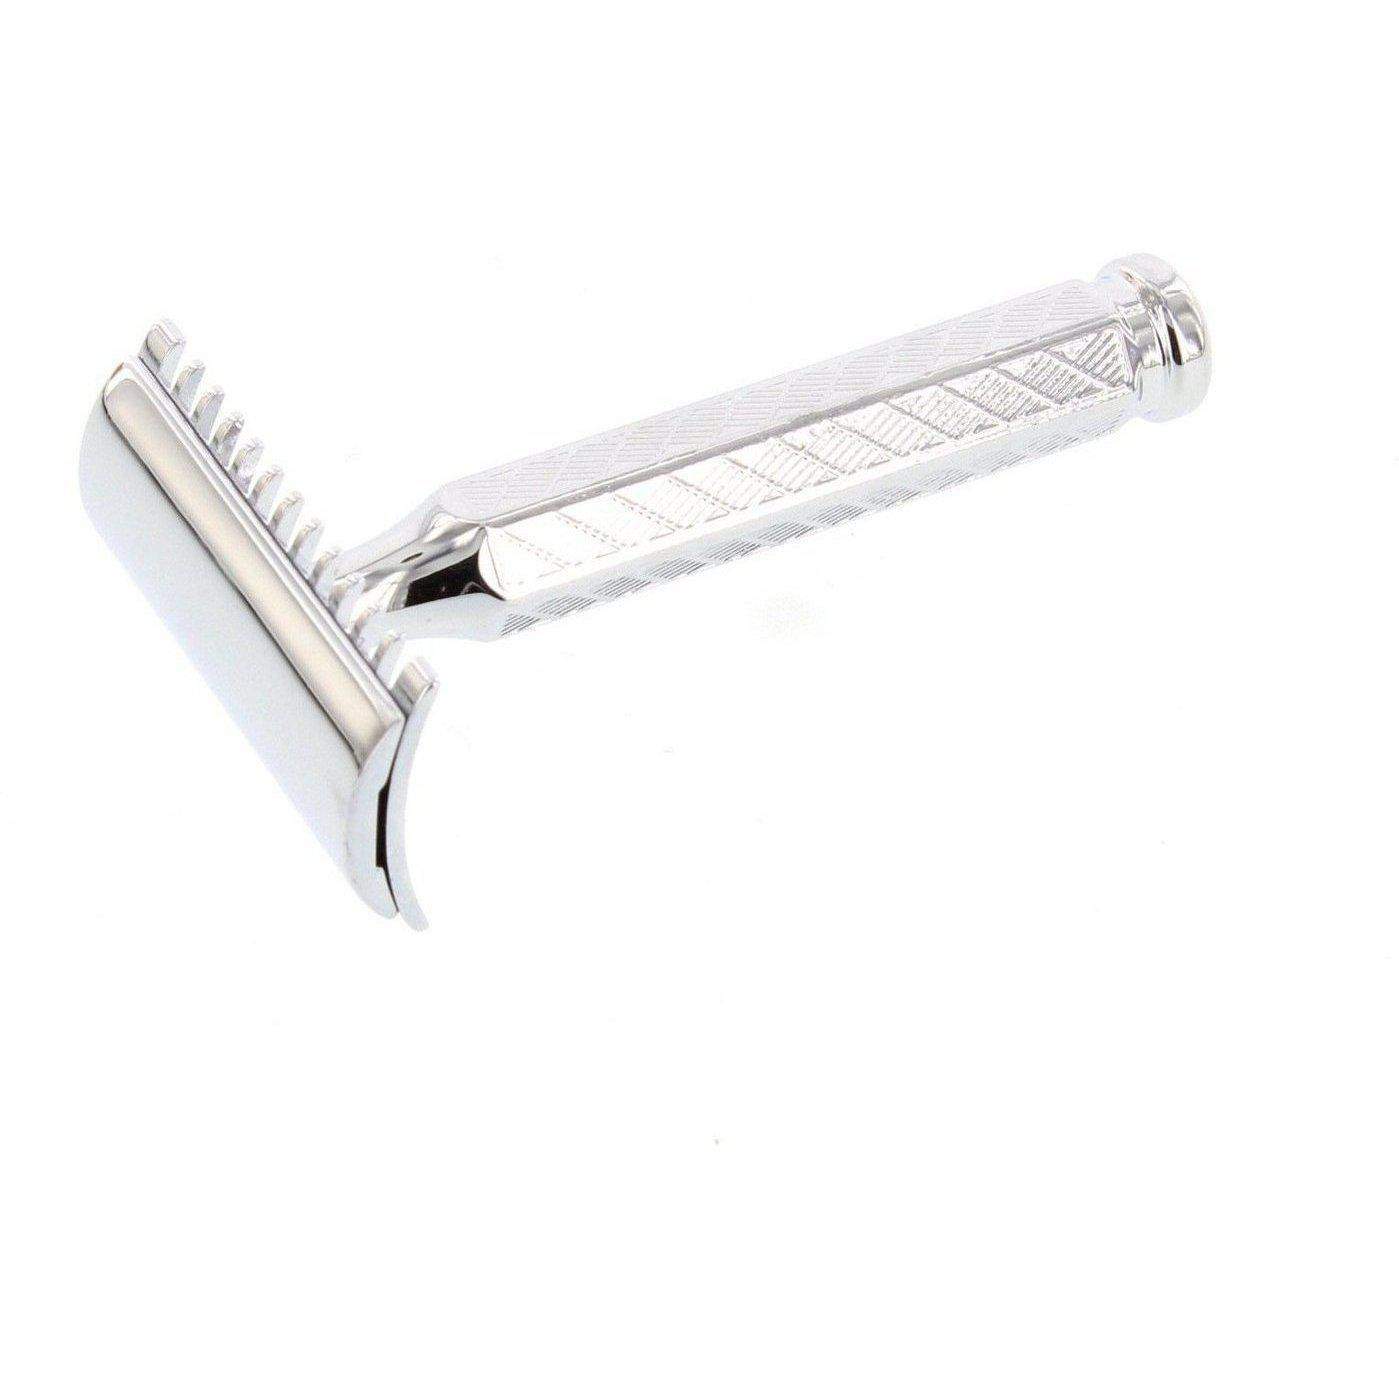 Product image 2 for Merkur Classic 1904 / 1906 Safety Razor, Open Tooth